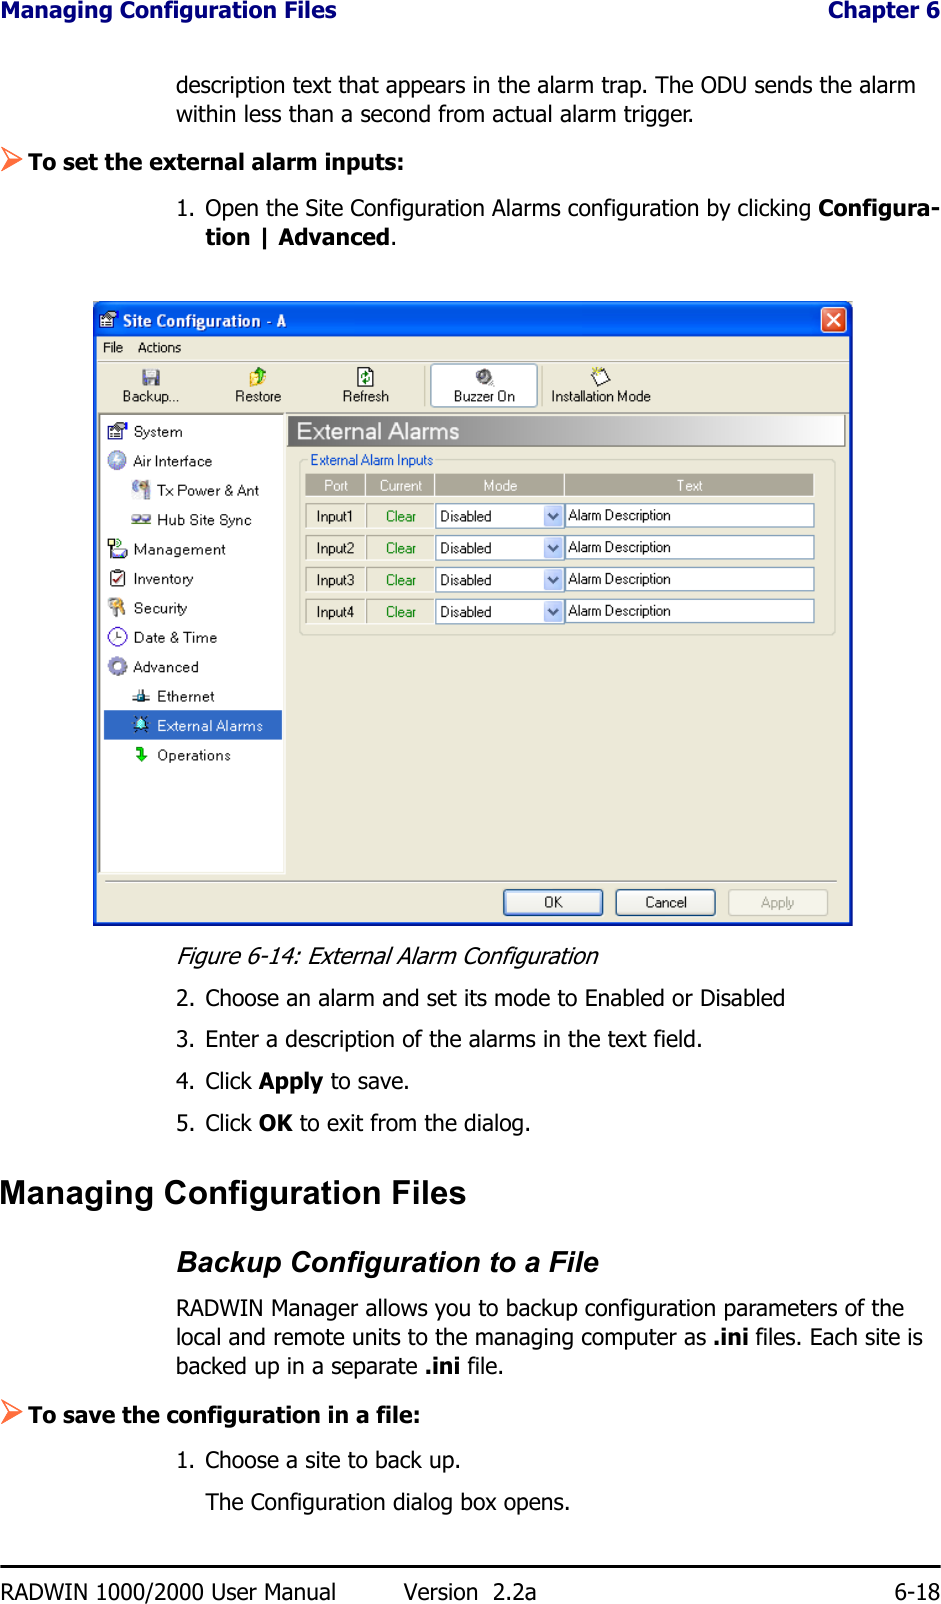 Managing Configuration Files  Chapter 6RADWIN 1000/2000 User Manual Version  2.2a 6-18description text that appears in the alarm trap. The ODU sends the alarm within less than a second from actual alarm trigger.¾To set the external alarm inputs:1. Open the Site Configuration Alarms configuration by clicking Configura-tion | Advanced.Figure 6-14: External Alarm Configuration2. Choose an alarm and set its mode to Enabled or Disabled3. Enter a description of the alarms in the text field.4. Click Apply to save.5. Click OK to exit from the dialog.Managing Configuration FilesBackup Configuration to a FileRADWIN Manager allows you to backup configuration parameters of the local and remote units to the managing computer as .ini files. Each site is backed up in a separate .ini file.¾To save the configuration in a file:1. Choose a site to back up.The Configuration dialog box opens.